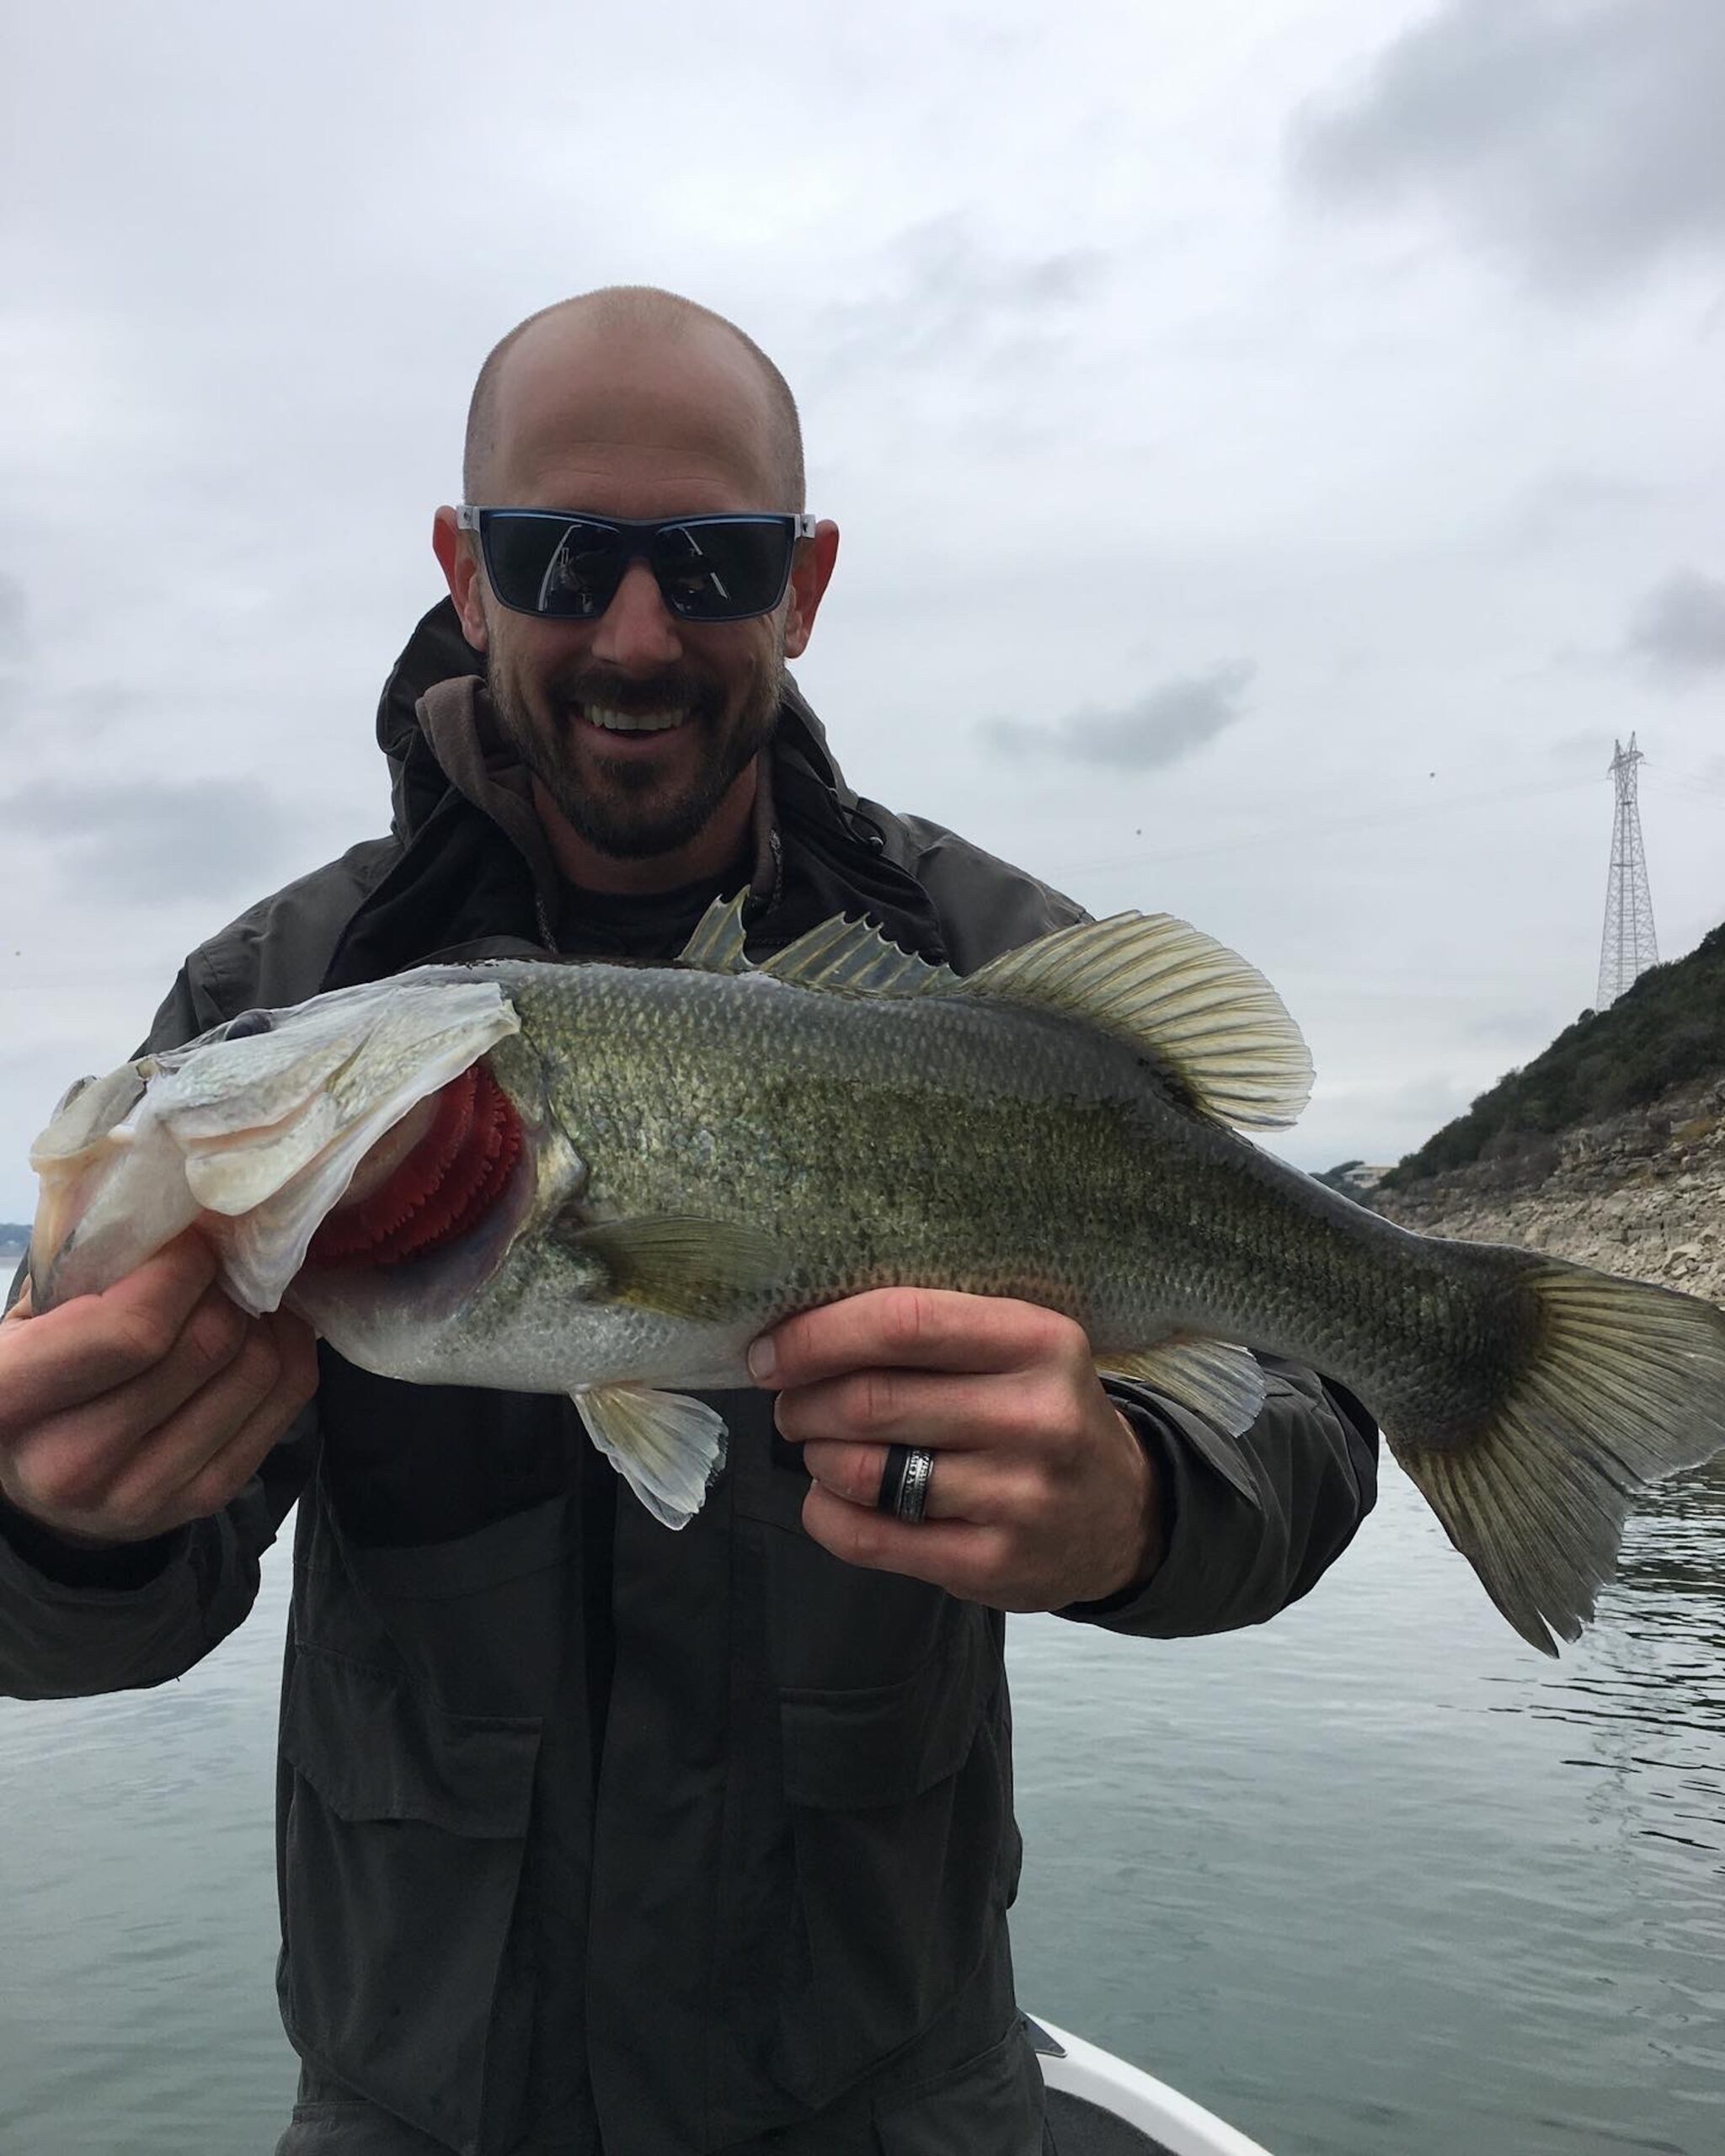 Bass spread out in Central Texas lakes - Texas Hunting & Fishing